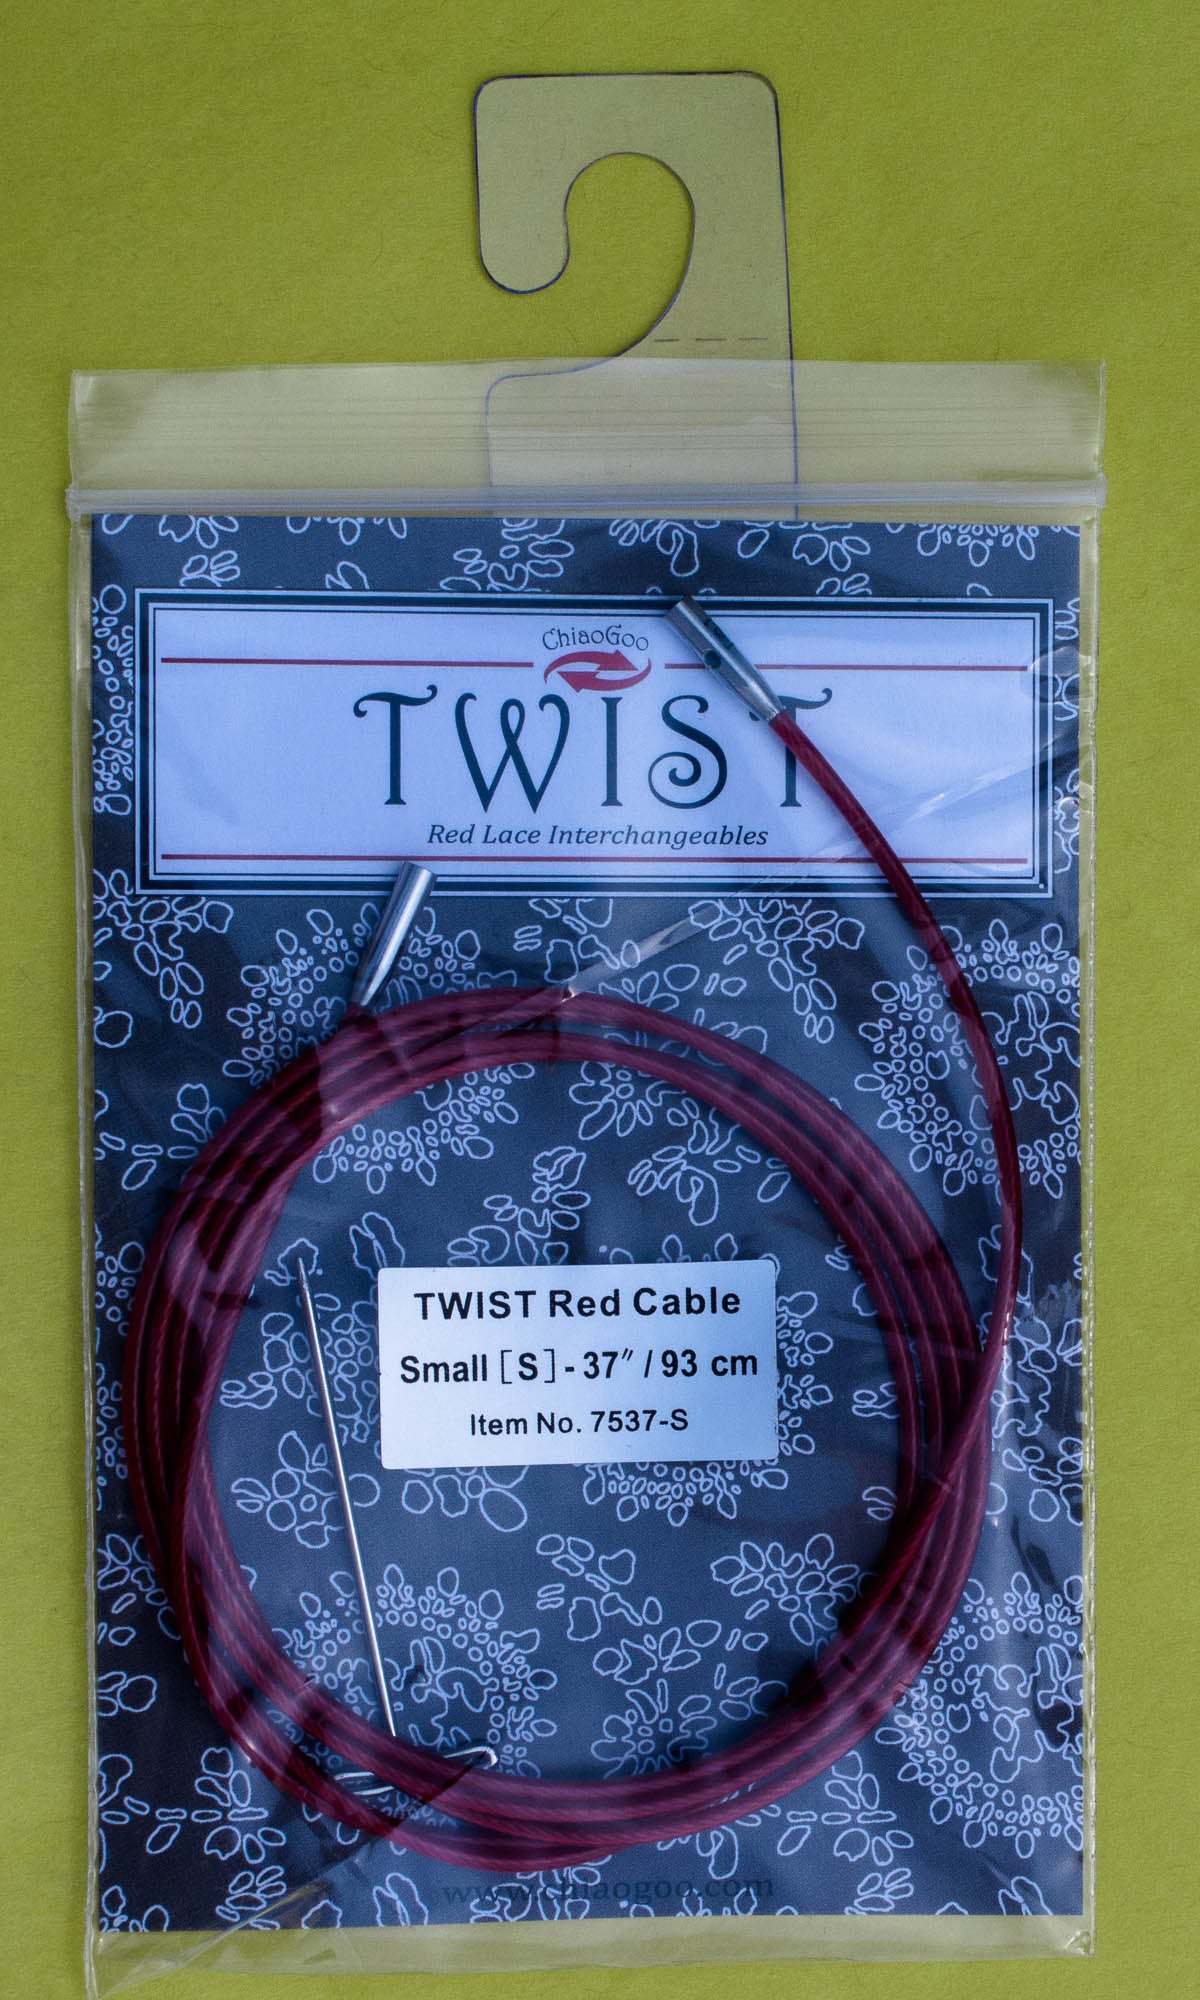 ChiaoGoo Twist Red Lace Interchangeable Cables 8in Small